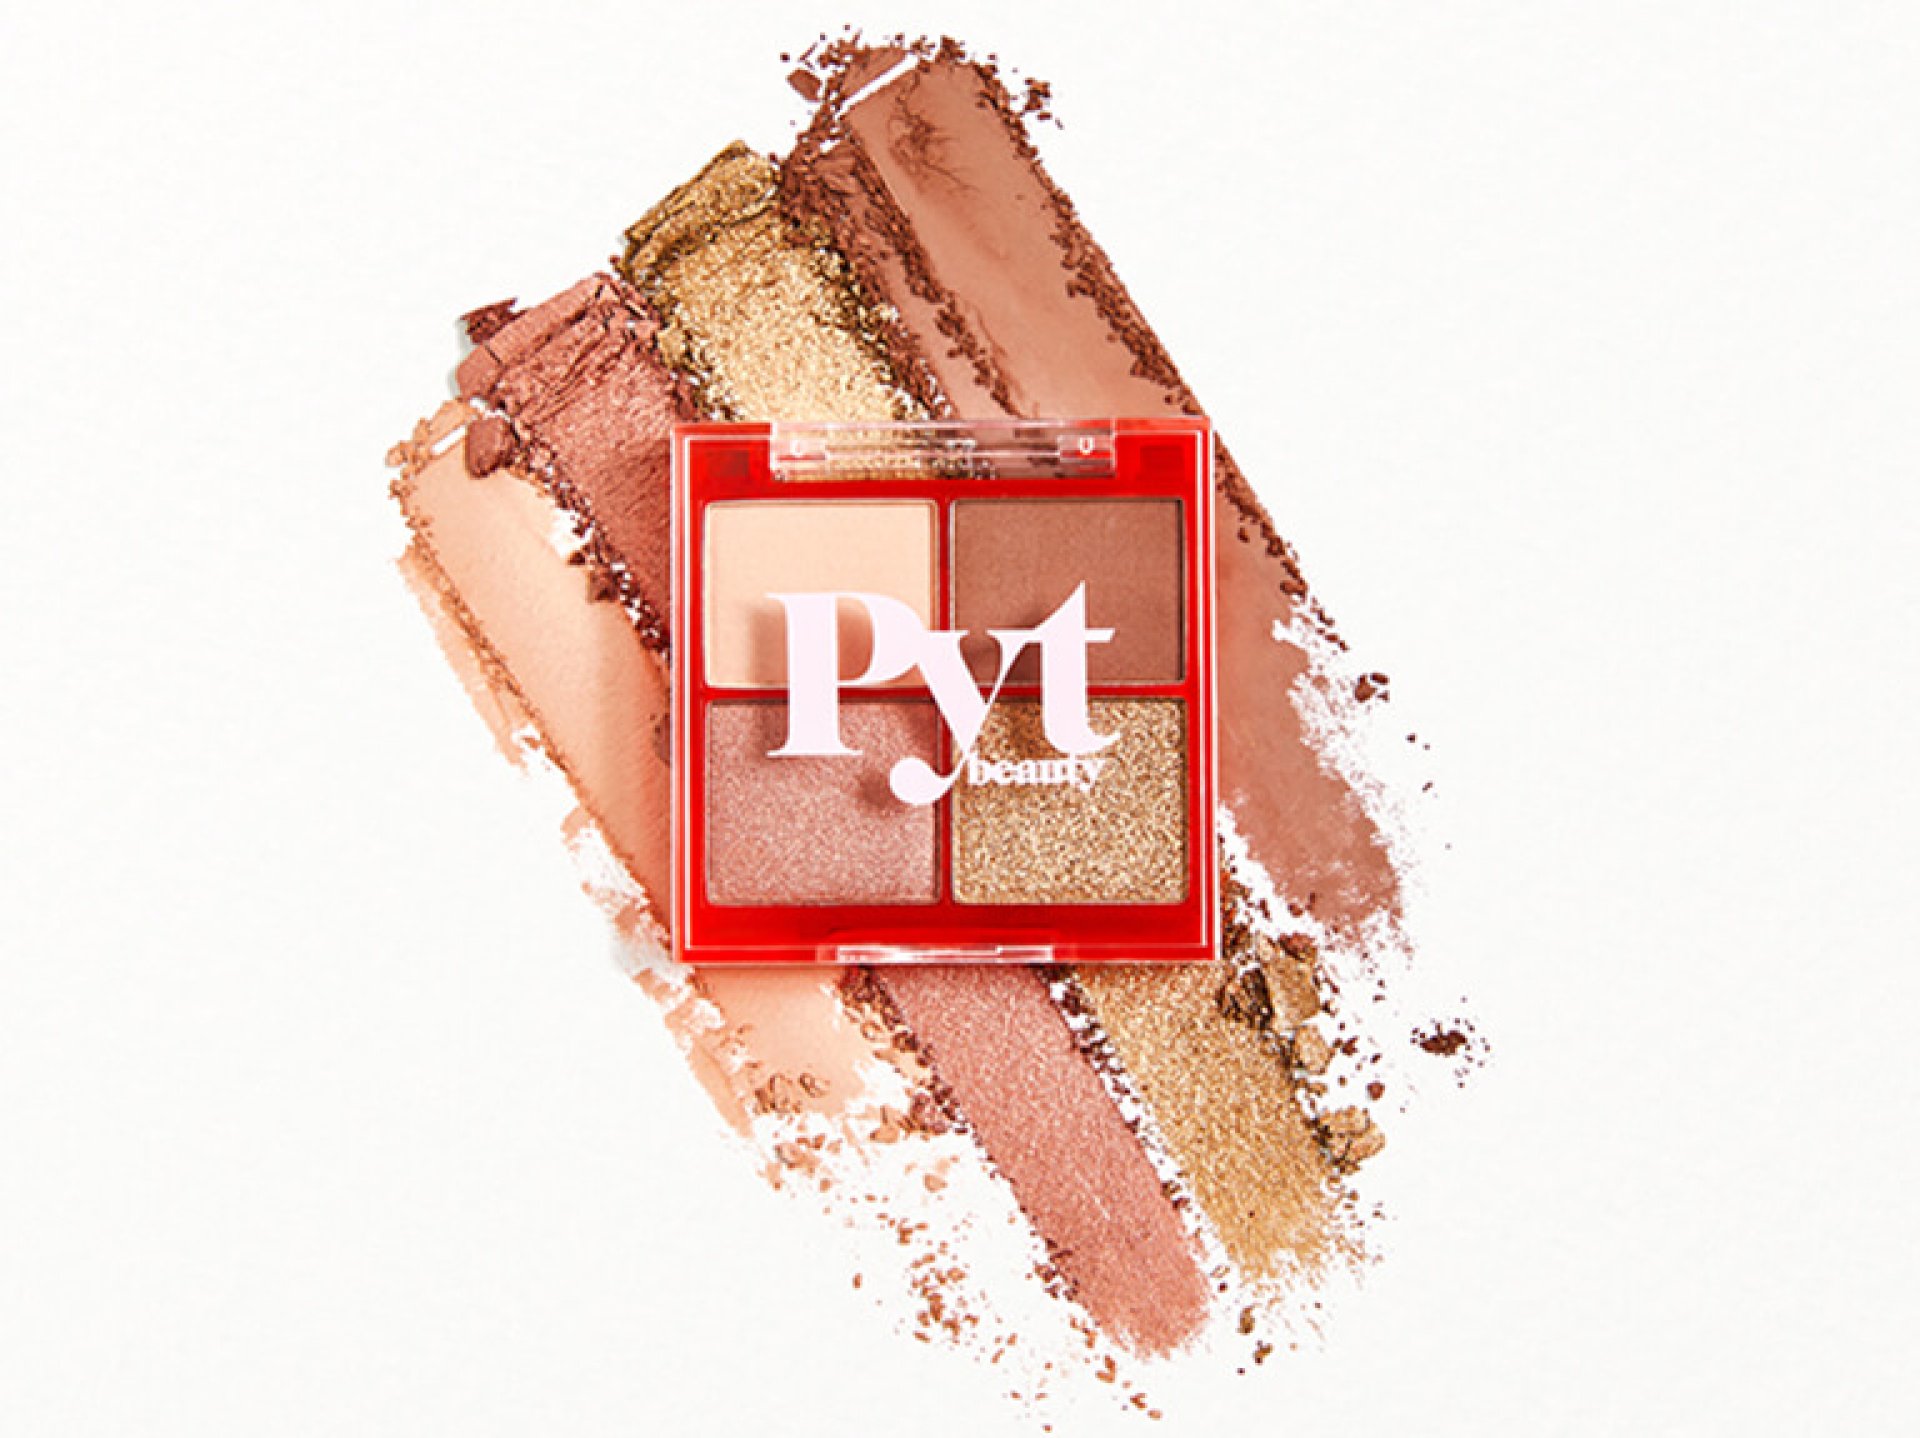 P-Y-T BEAUTY Upcycle Eyeshadow Palette - Warm Lit Nude Mini in Sand Dune, Slow Burn, Bonfire, and Golden Hour